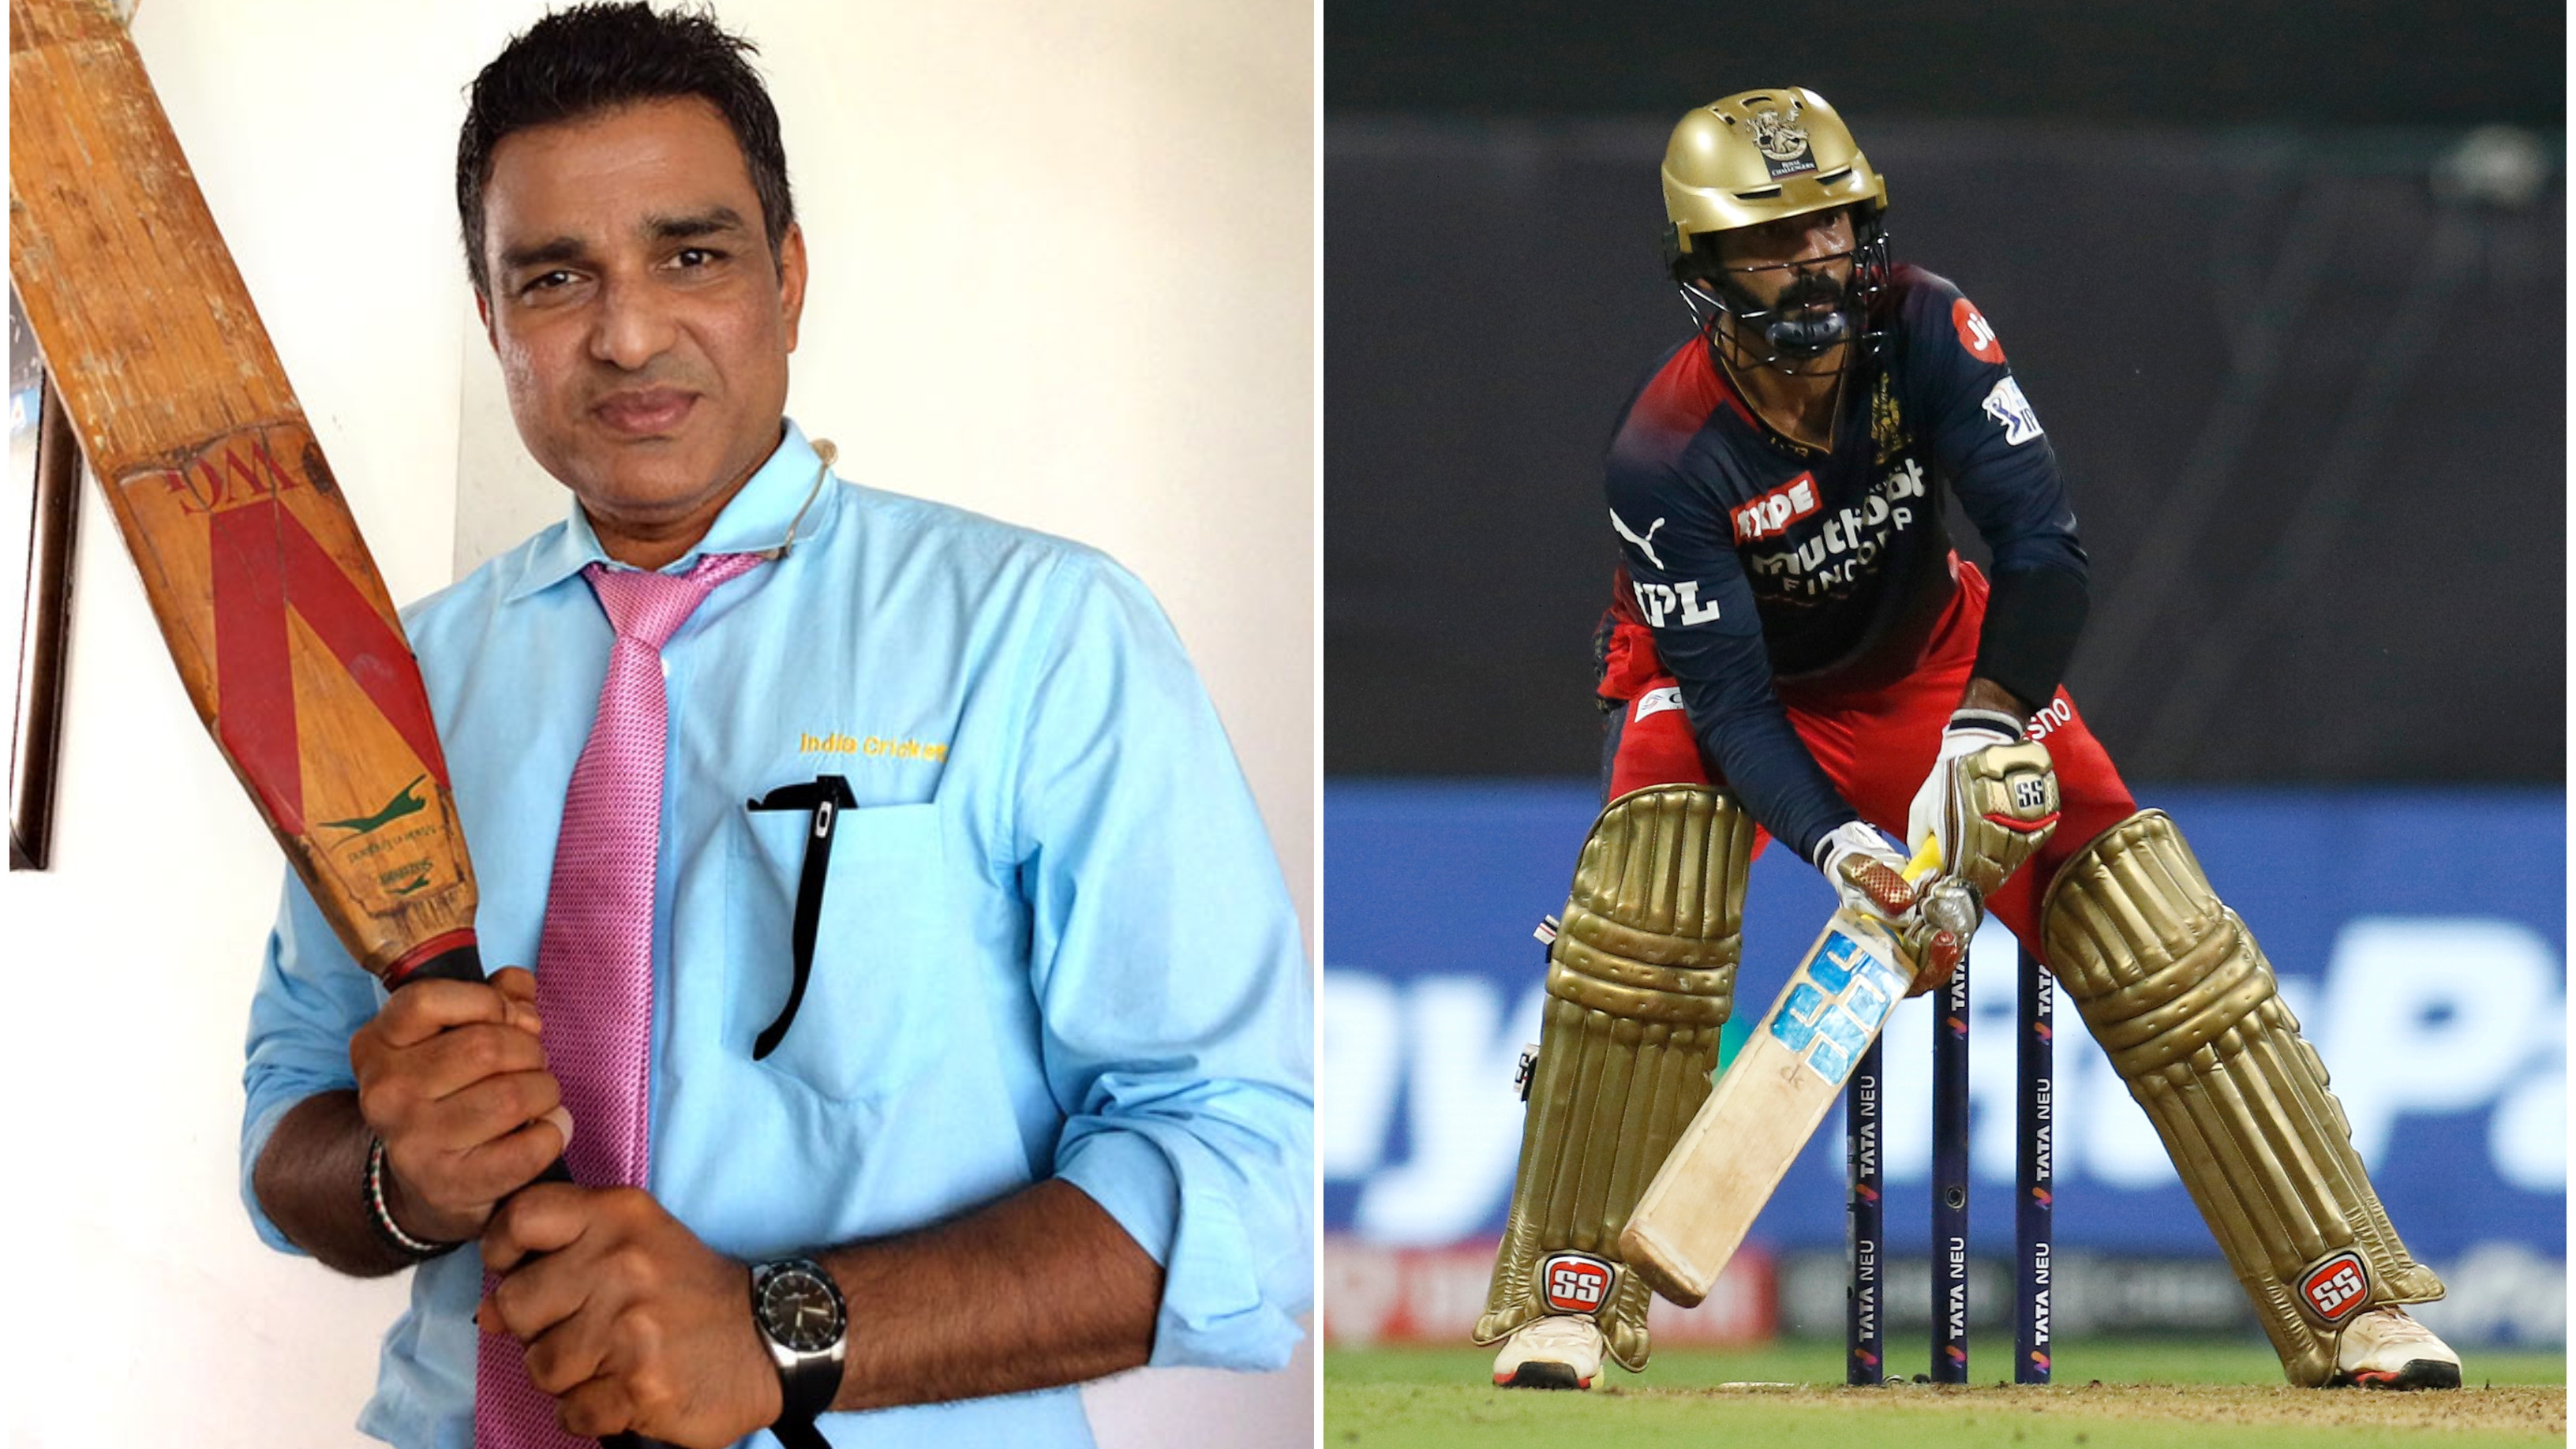 IPL 2022: ‘He will have to displace Rishabh Pant’, Manjrekar feels it will be tough for Karthik to break into T20 WC XI